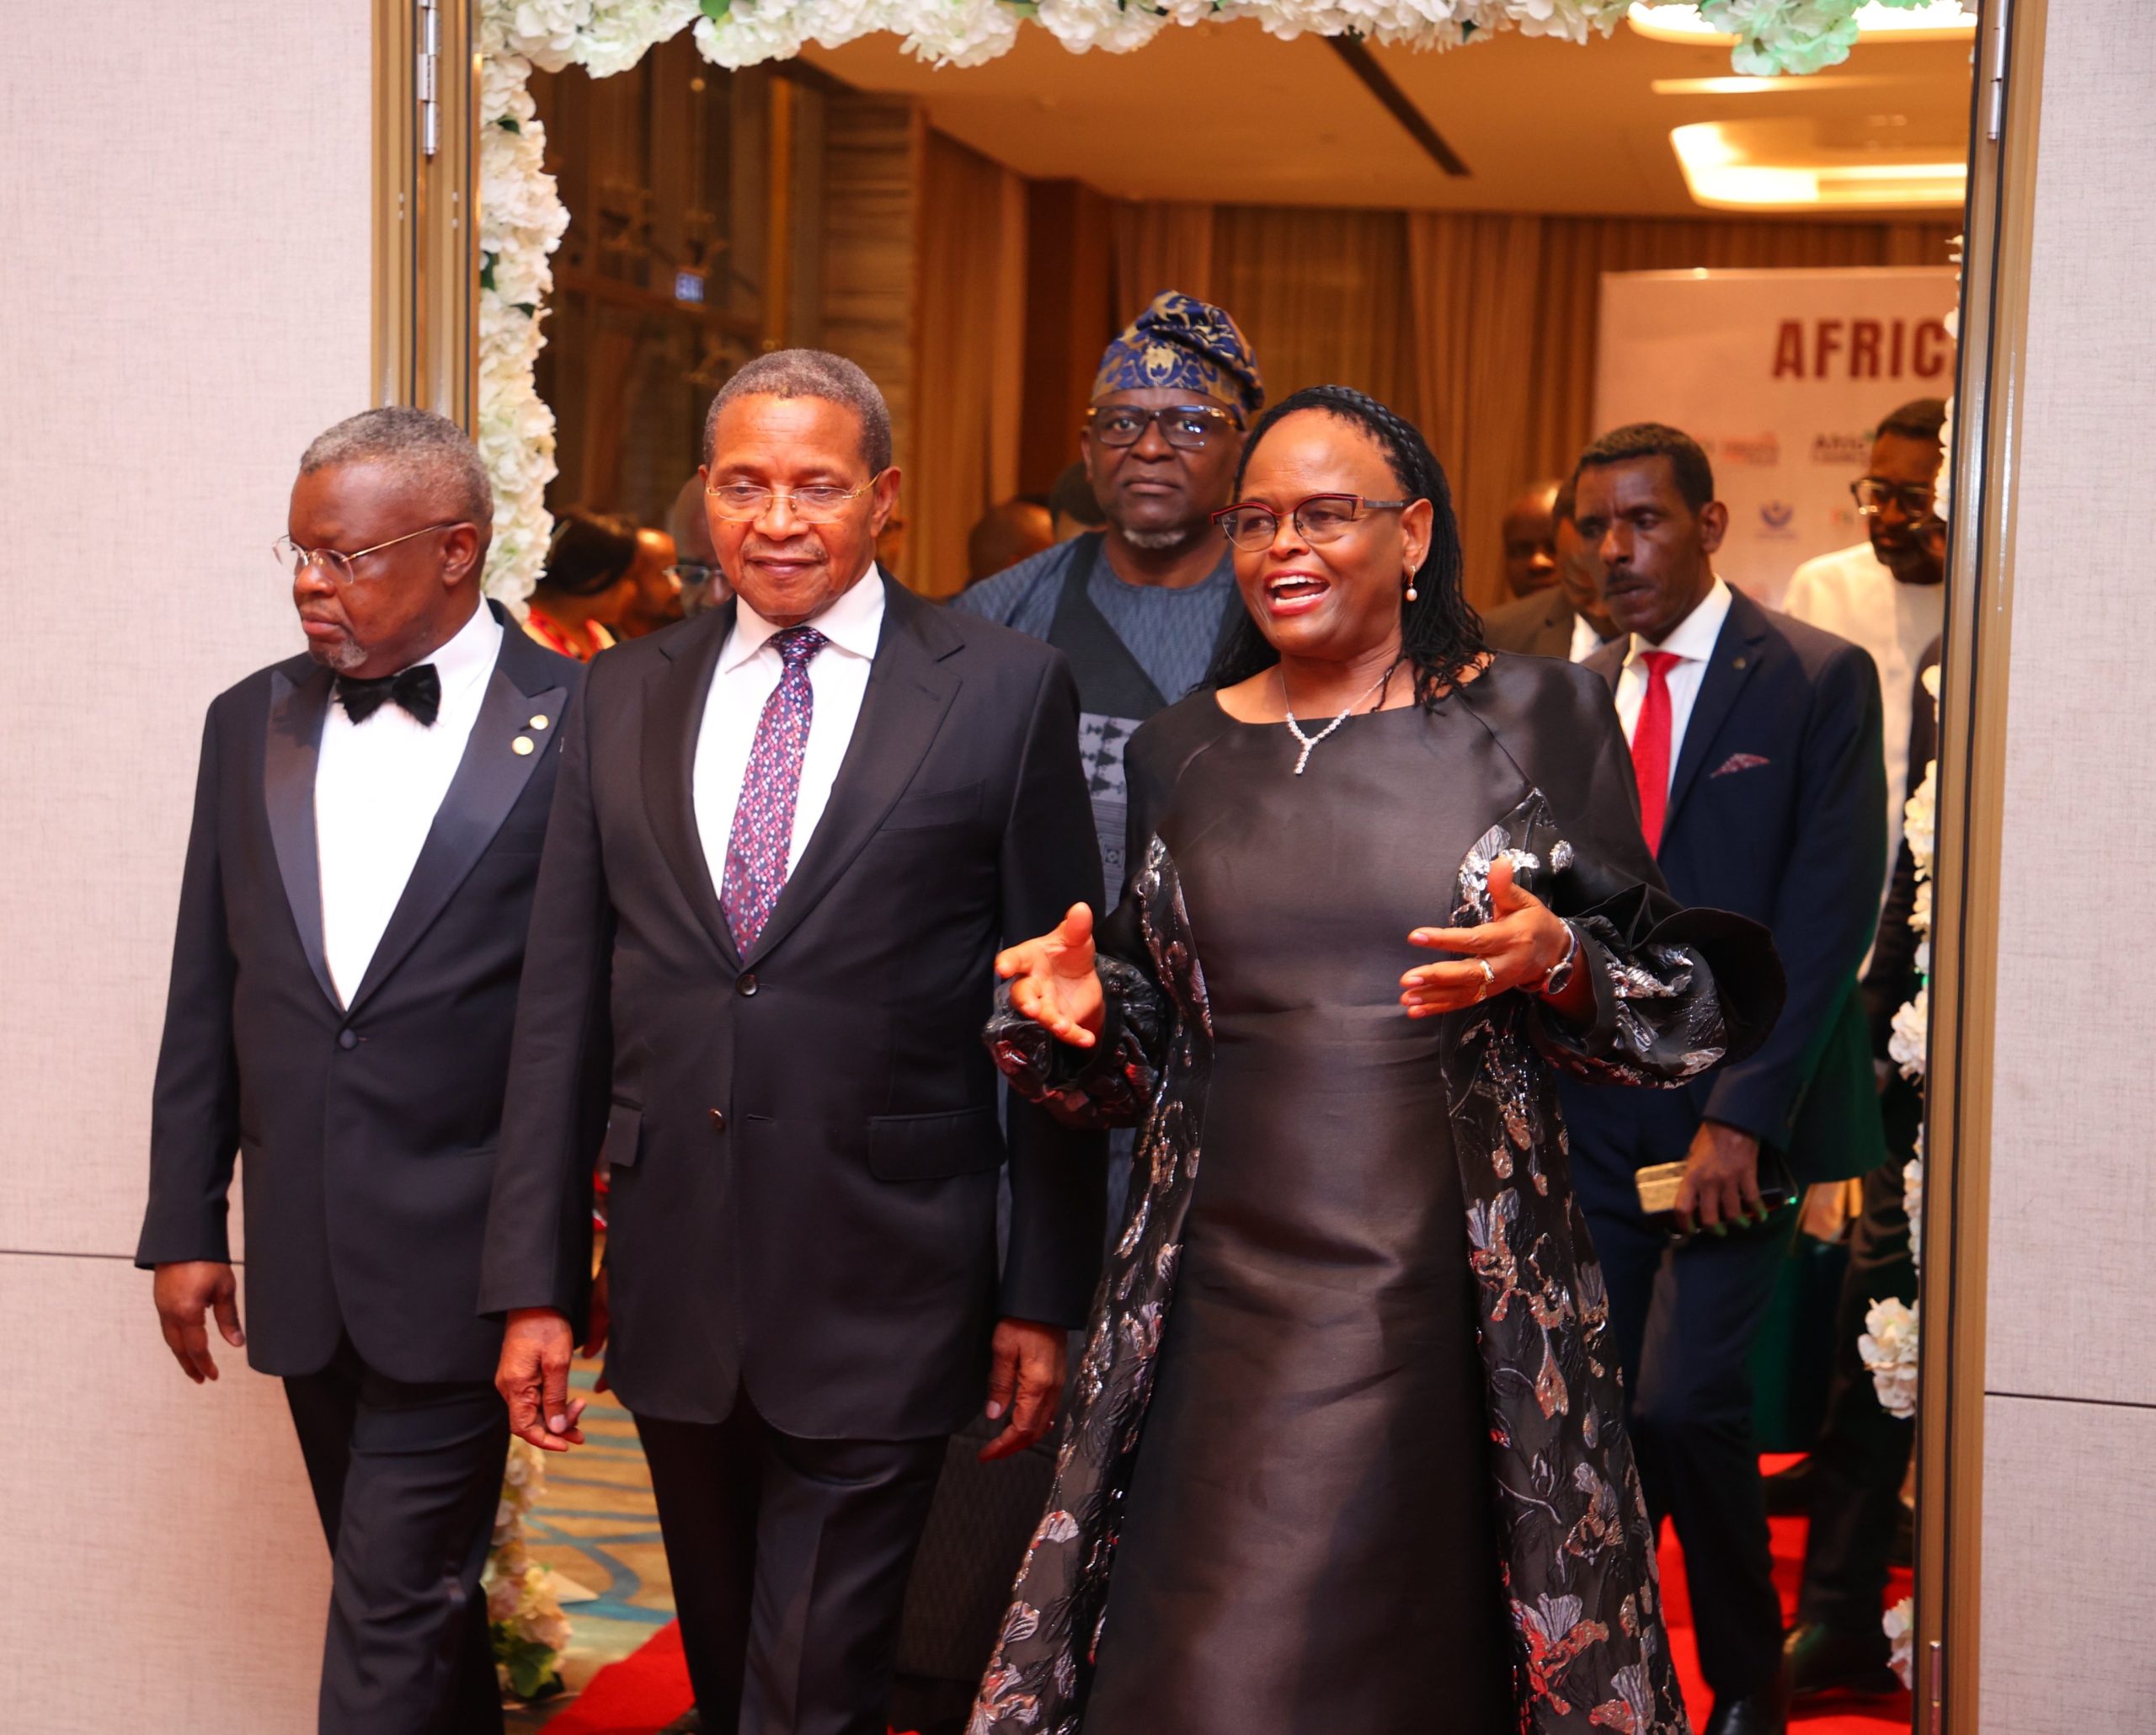 CJ Koome feted at African Persons of the Year awards